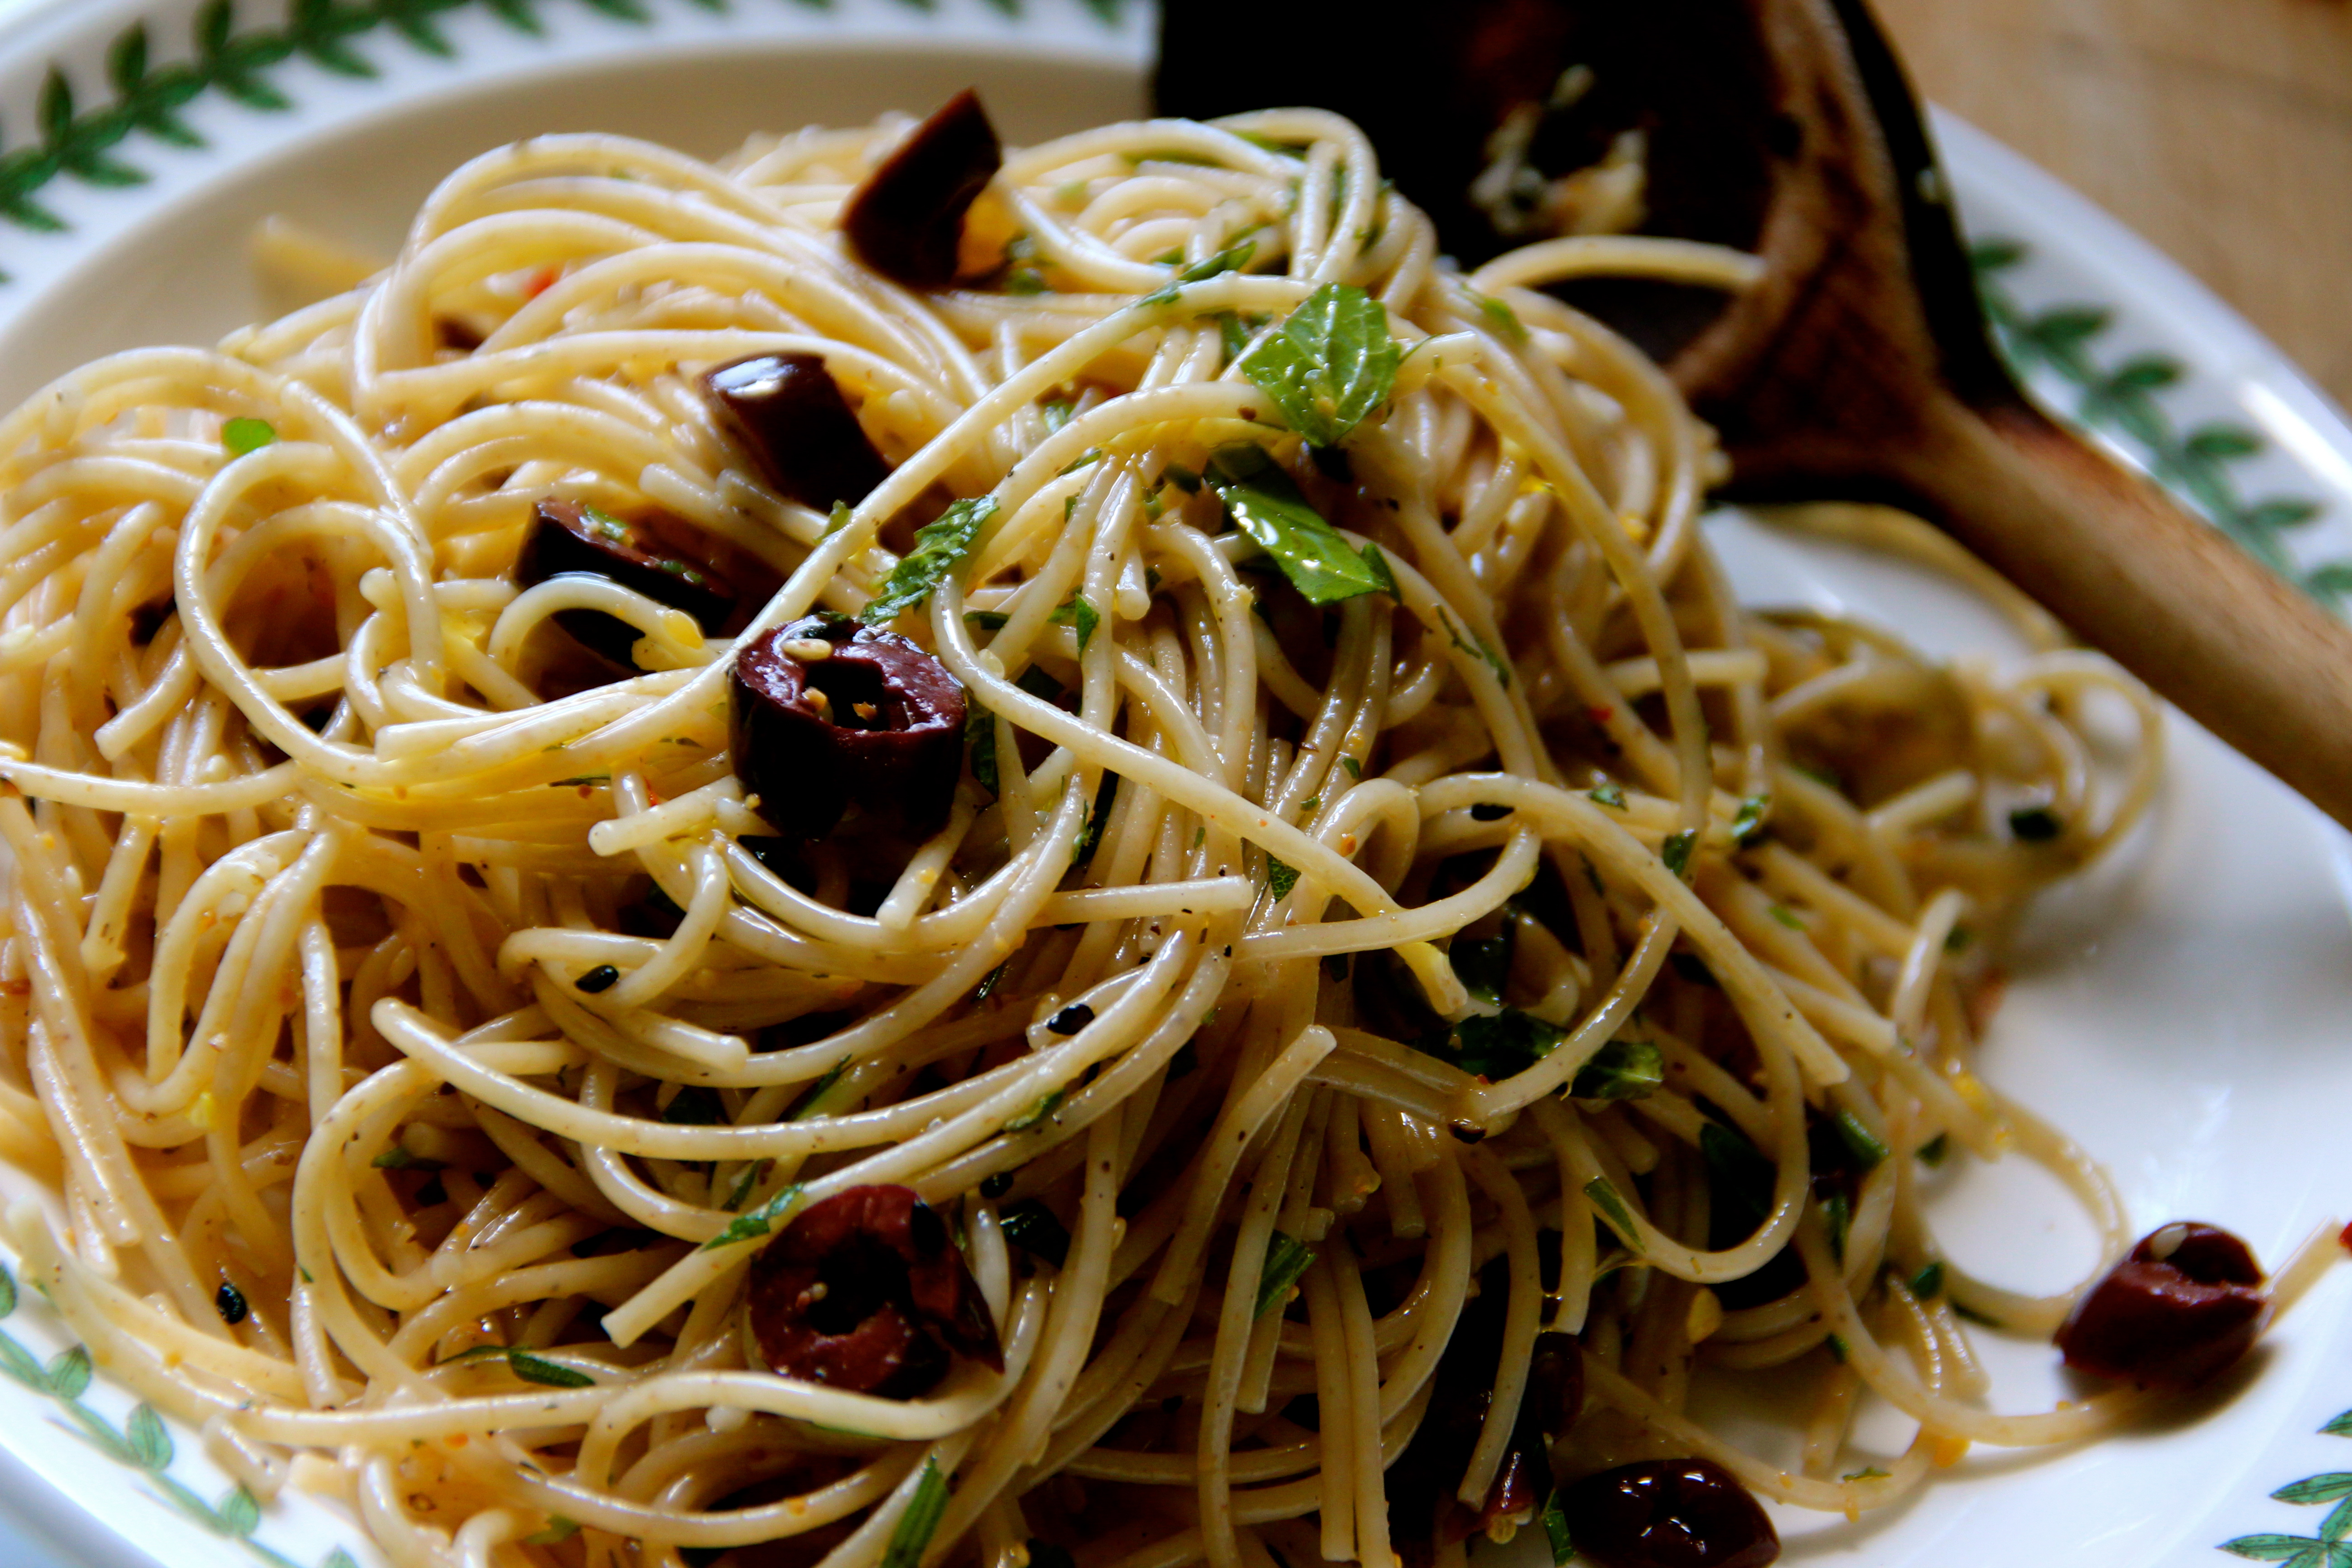 Pasta, truffle oil, french ,olives, herbs, French cuisine, pasta